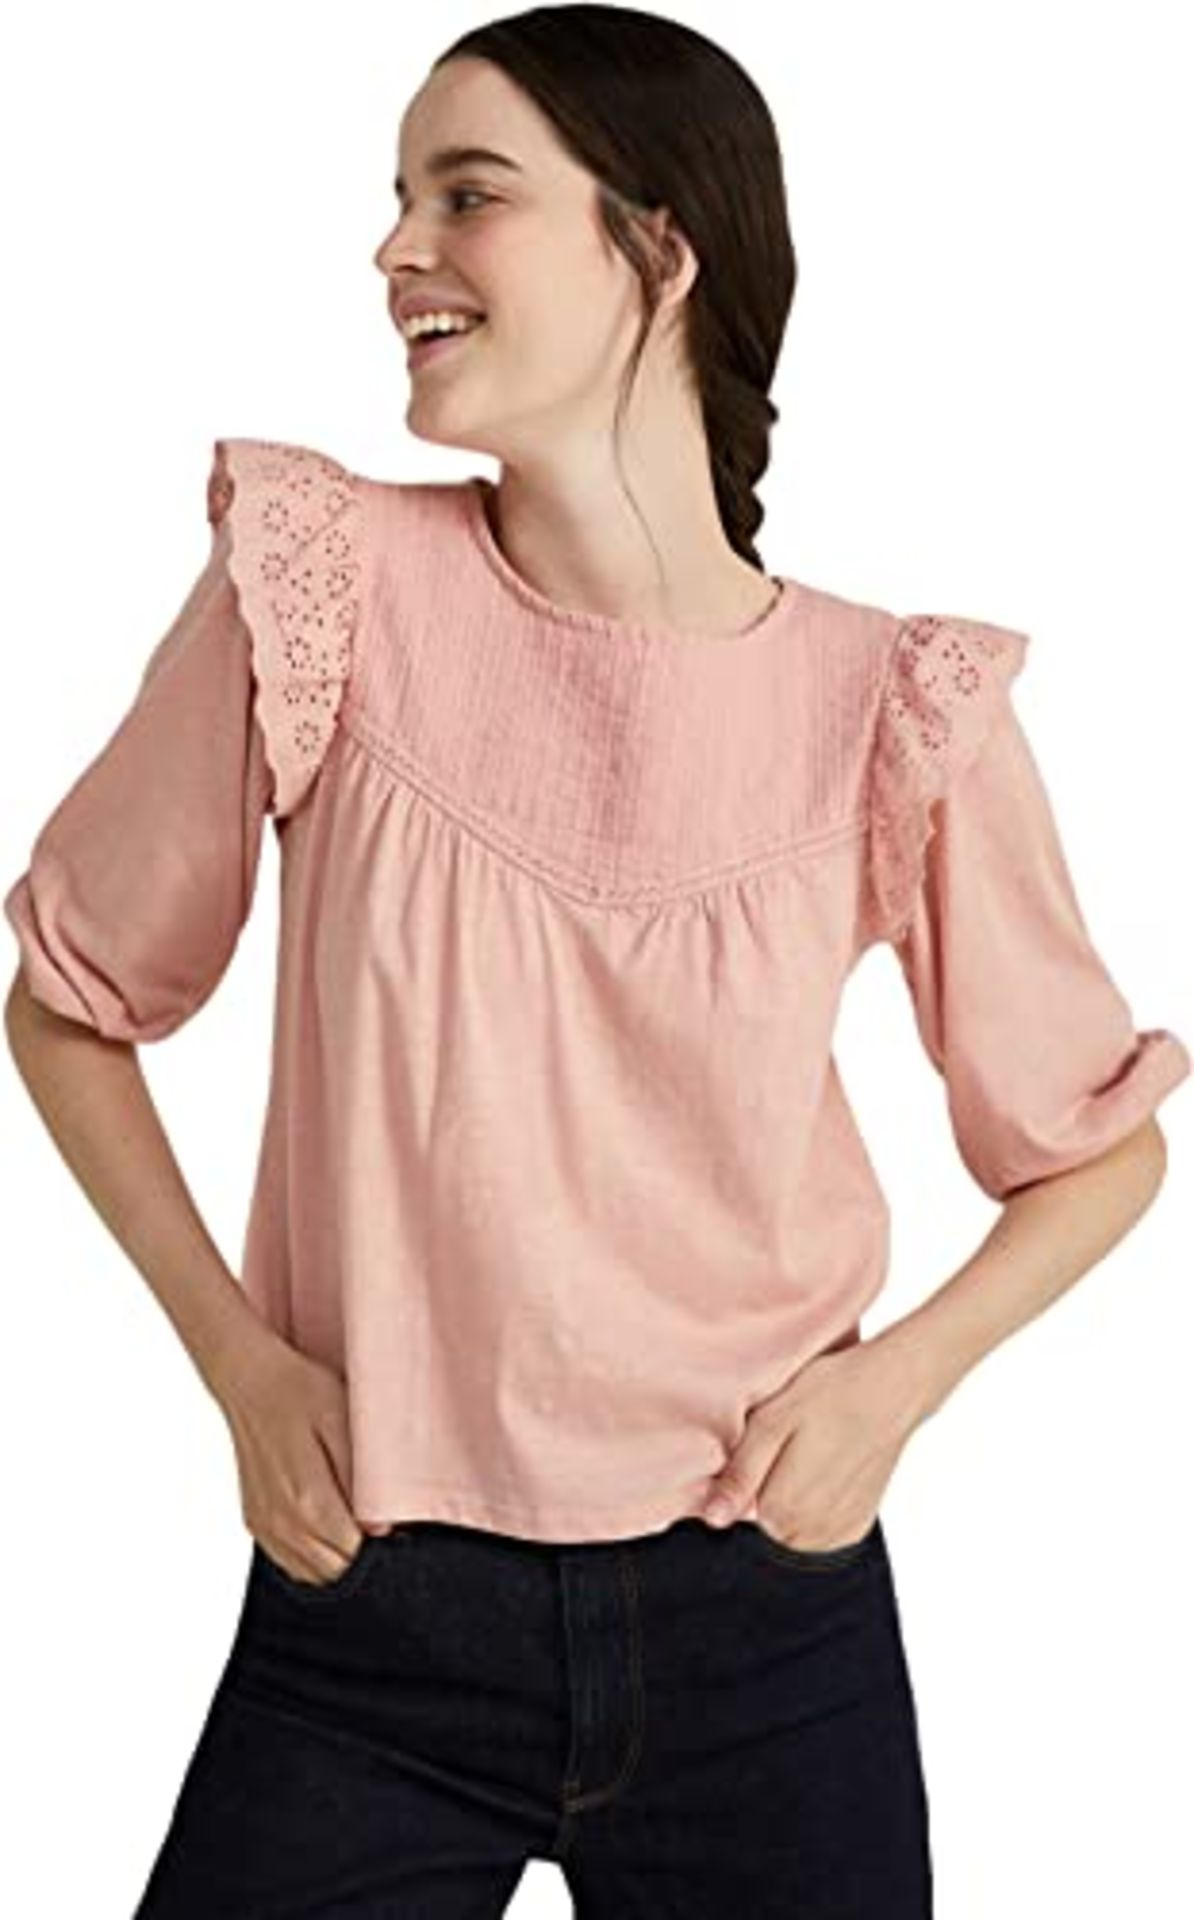 Springfield Pleated Bicolor Blouse T-Shirt, Pink, XS Woman